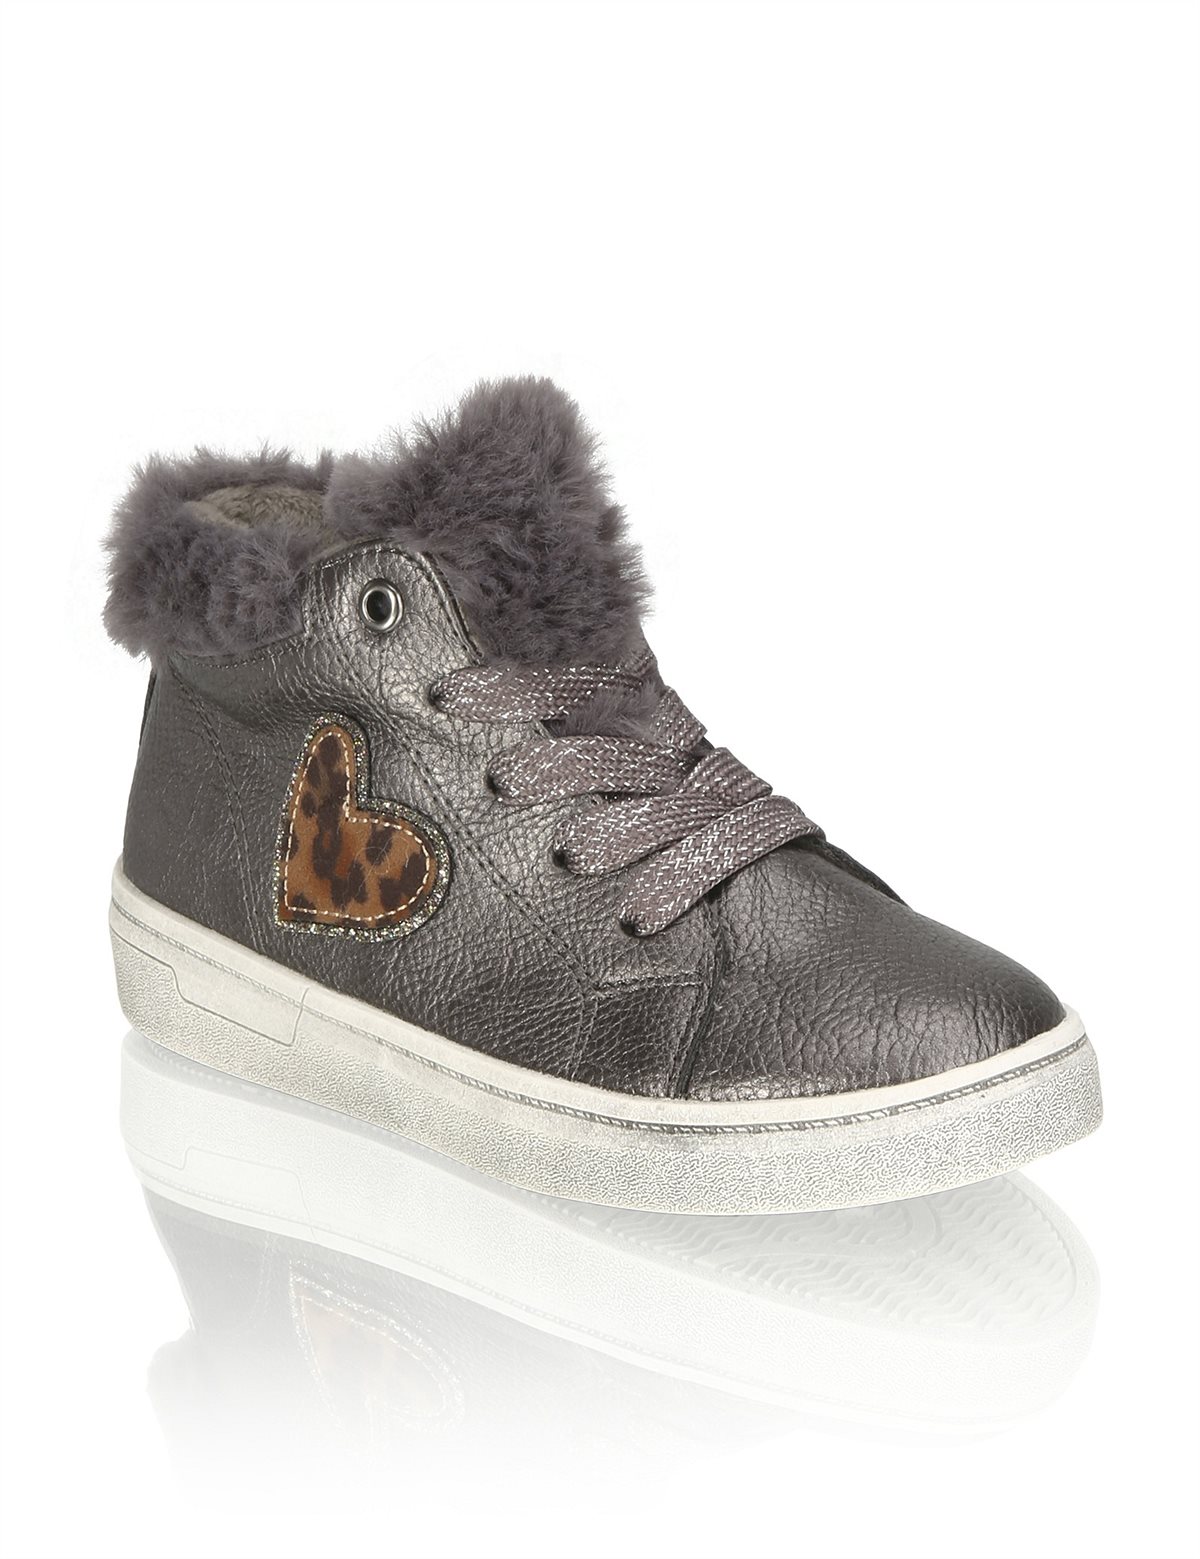 HUMANIC 15 Kids Funky Girls Boot ab EUR 34,95 ab Ende August 3623504714